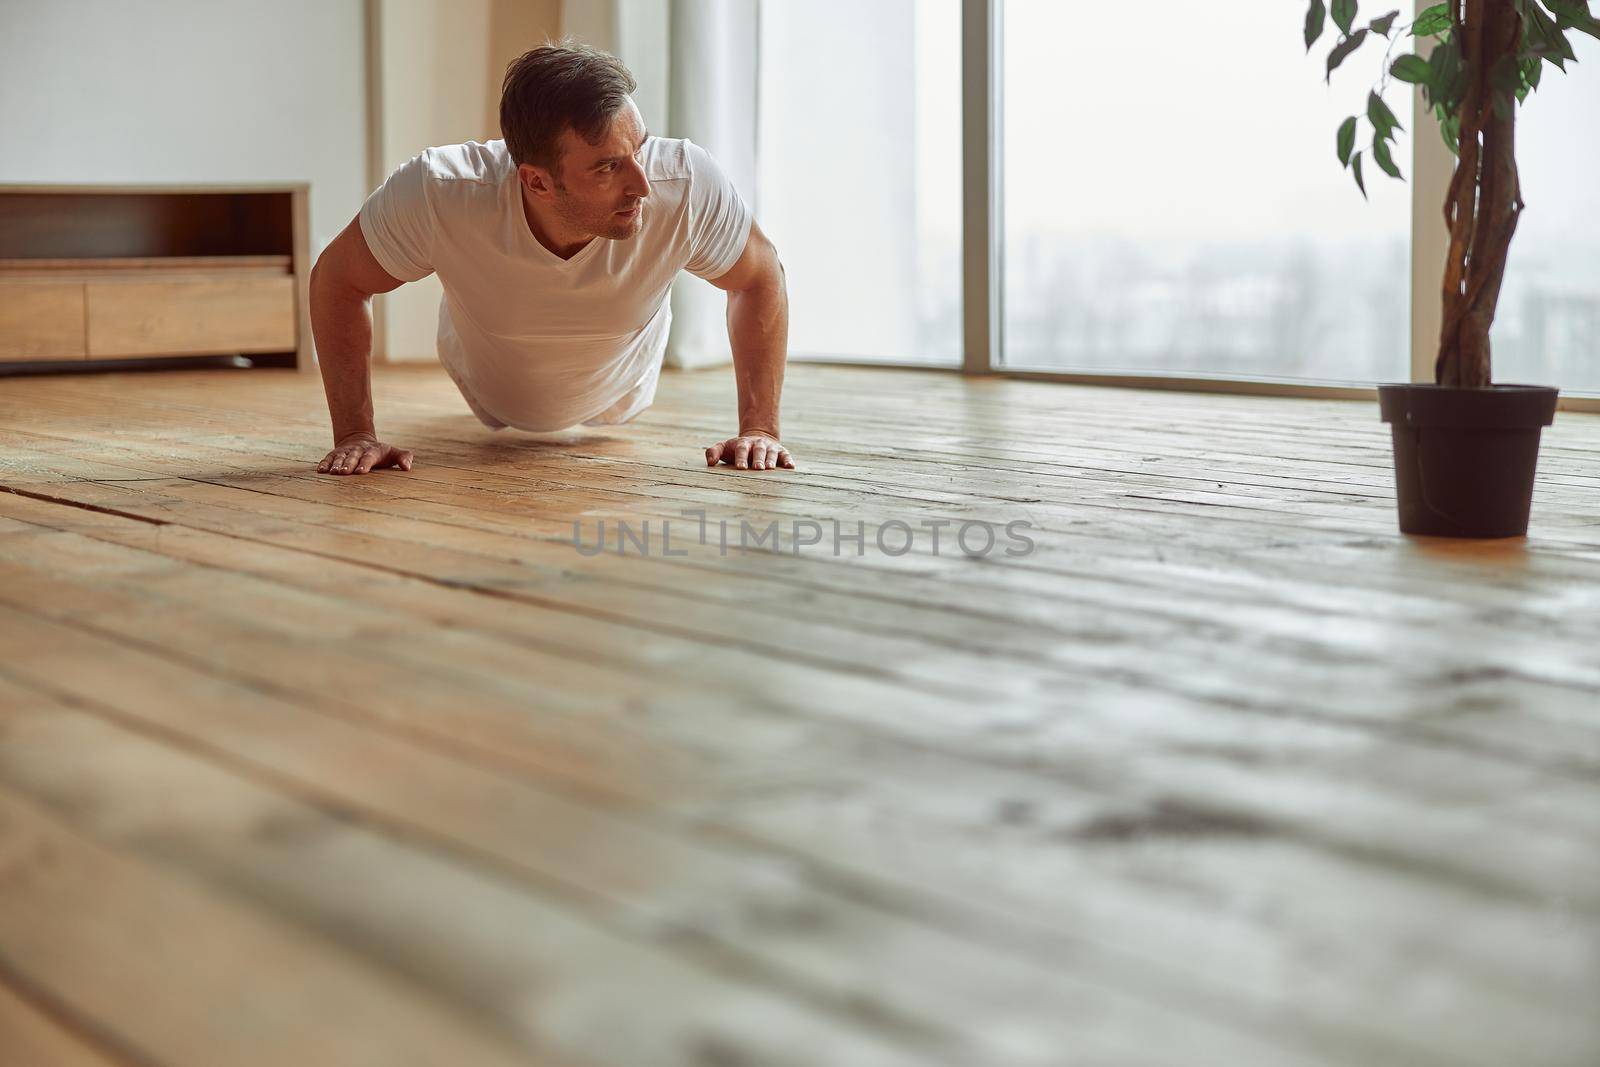 Low angle of athletic male doing push ups near window during domestic workout during quarantine